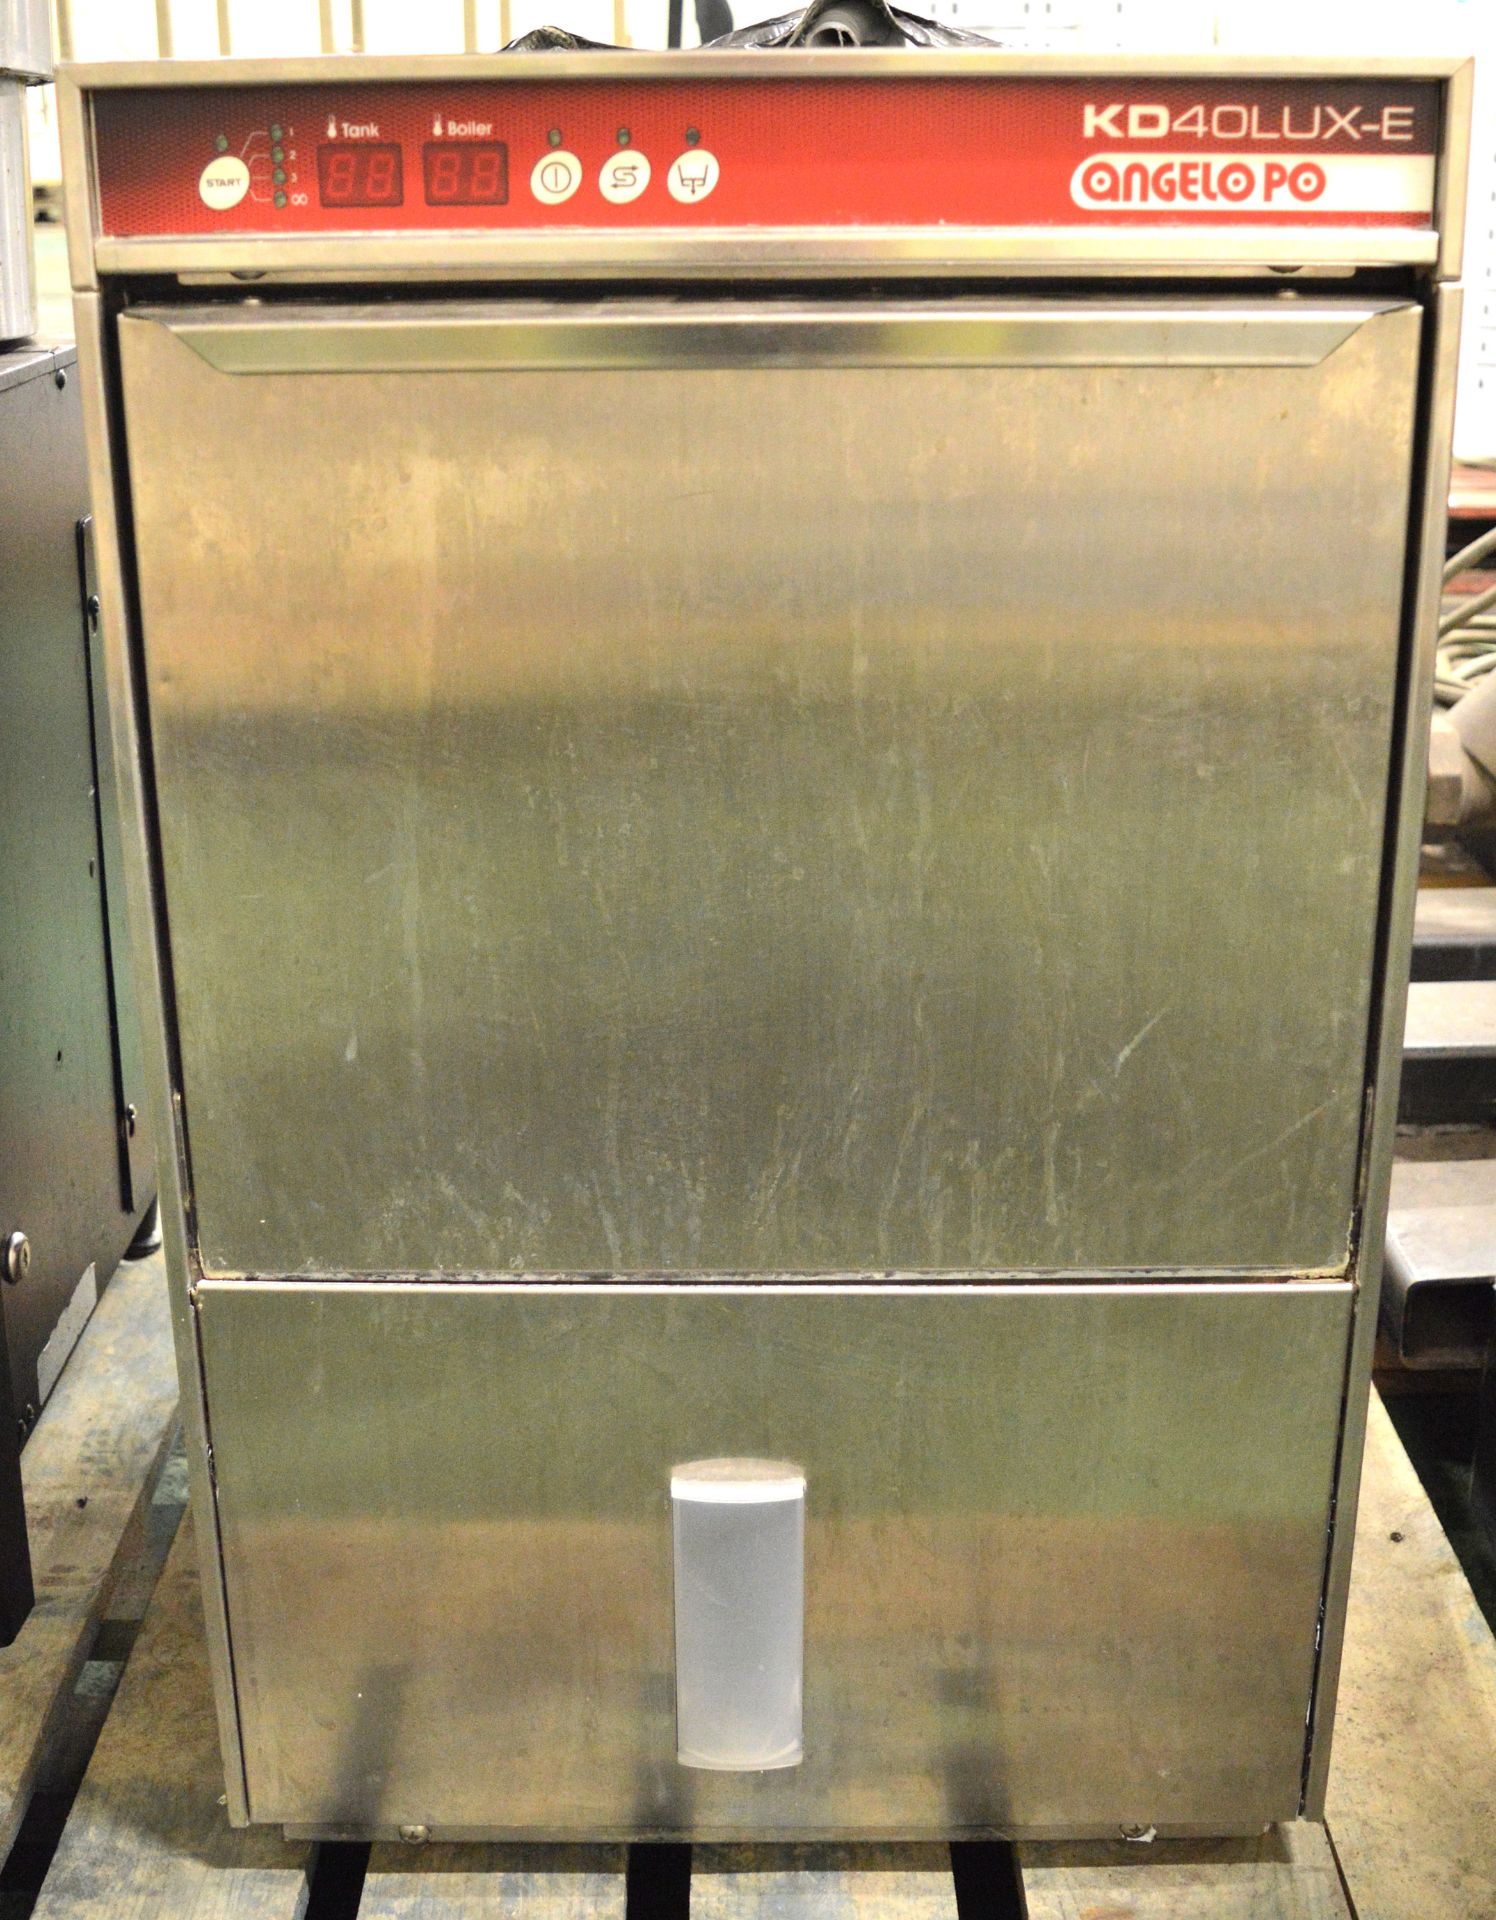 Angelo Po KD40LUX-E under counter glass washer